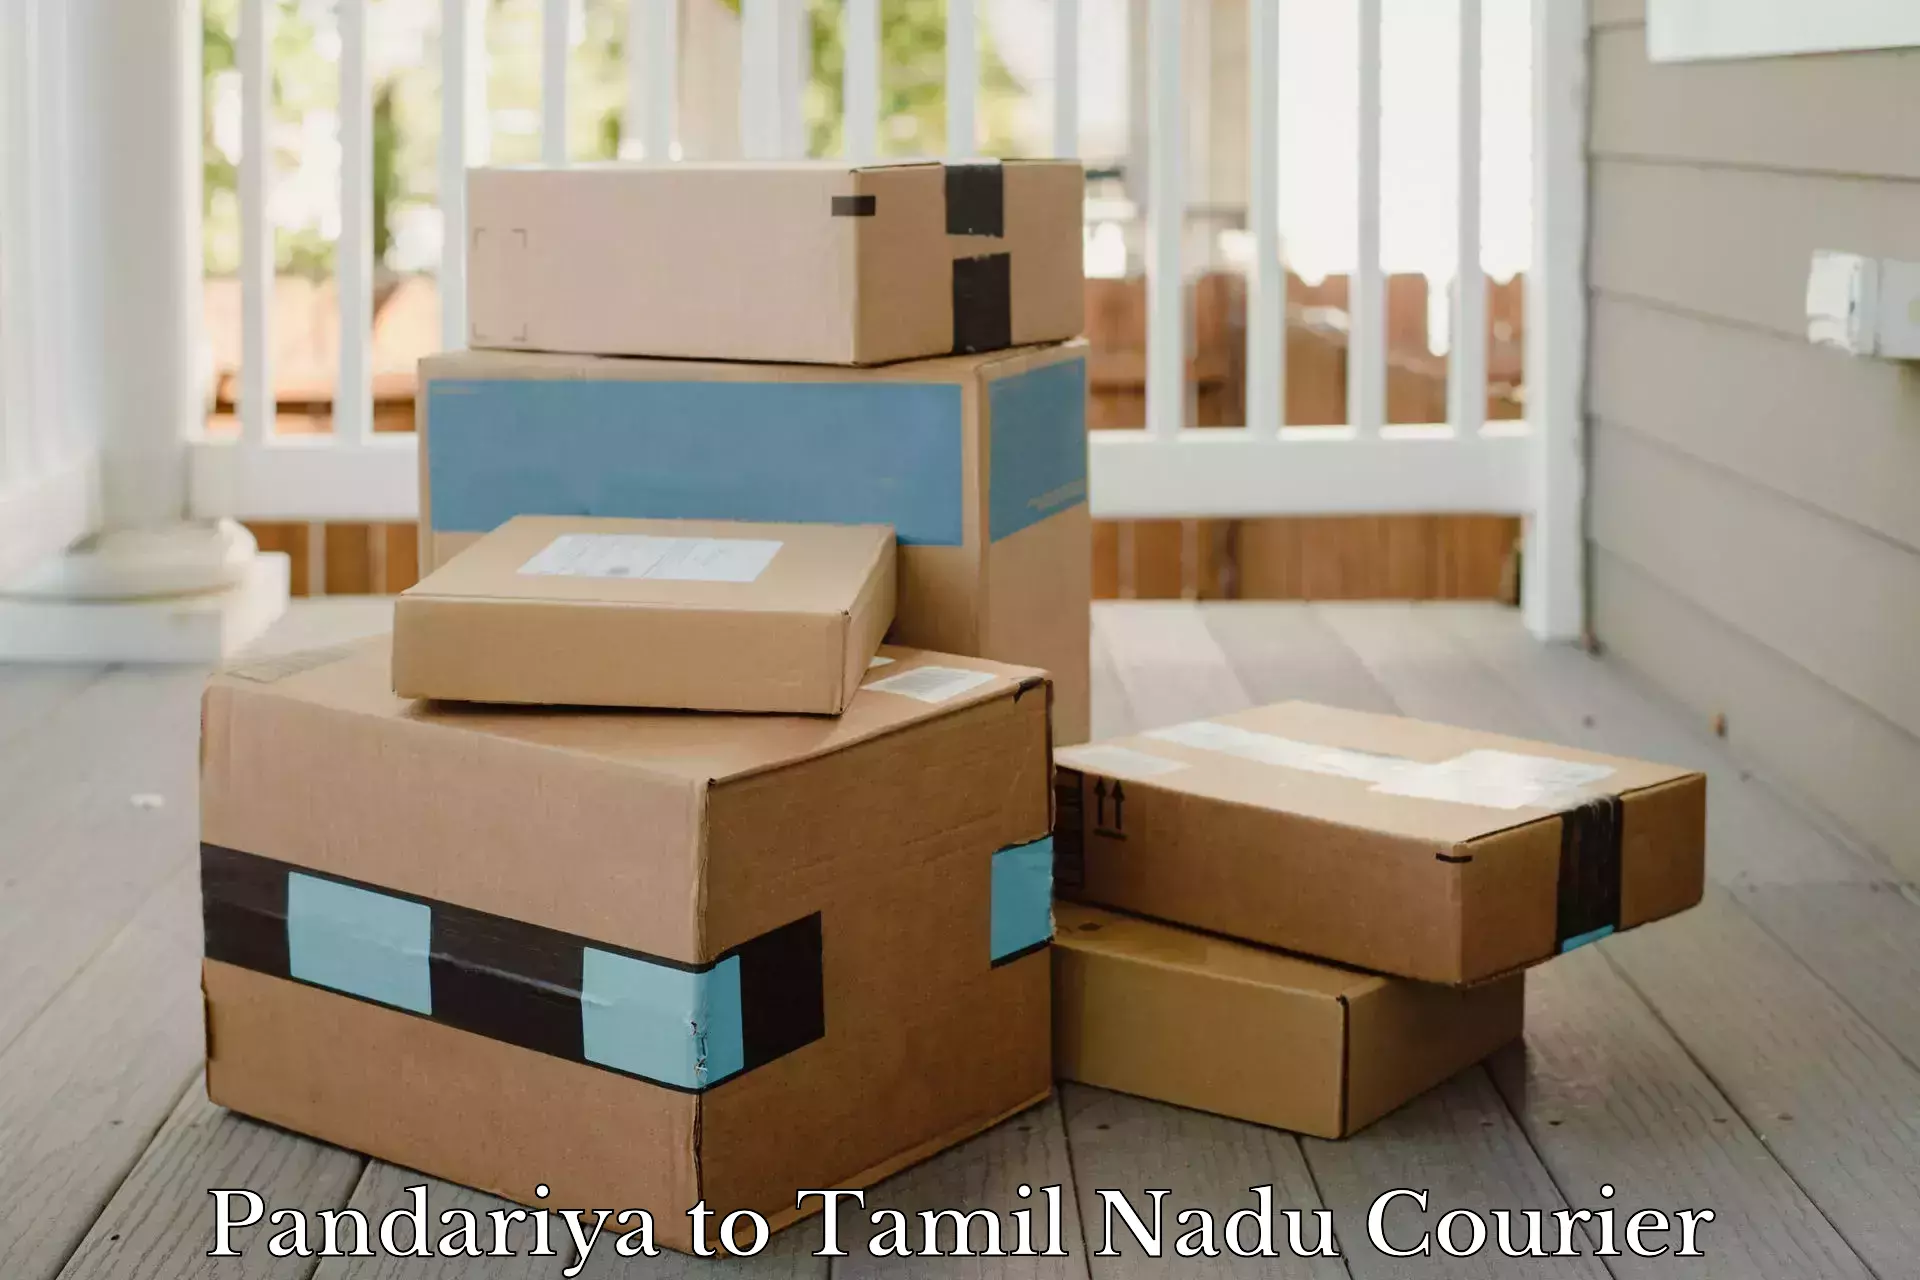 24-hour courier services in Pandariya to Chennai Port